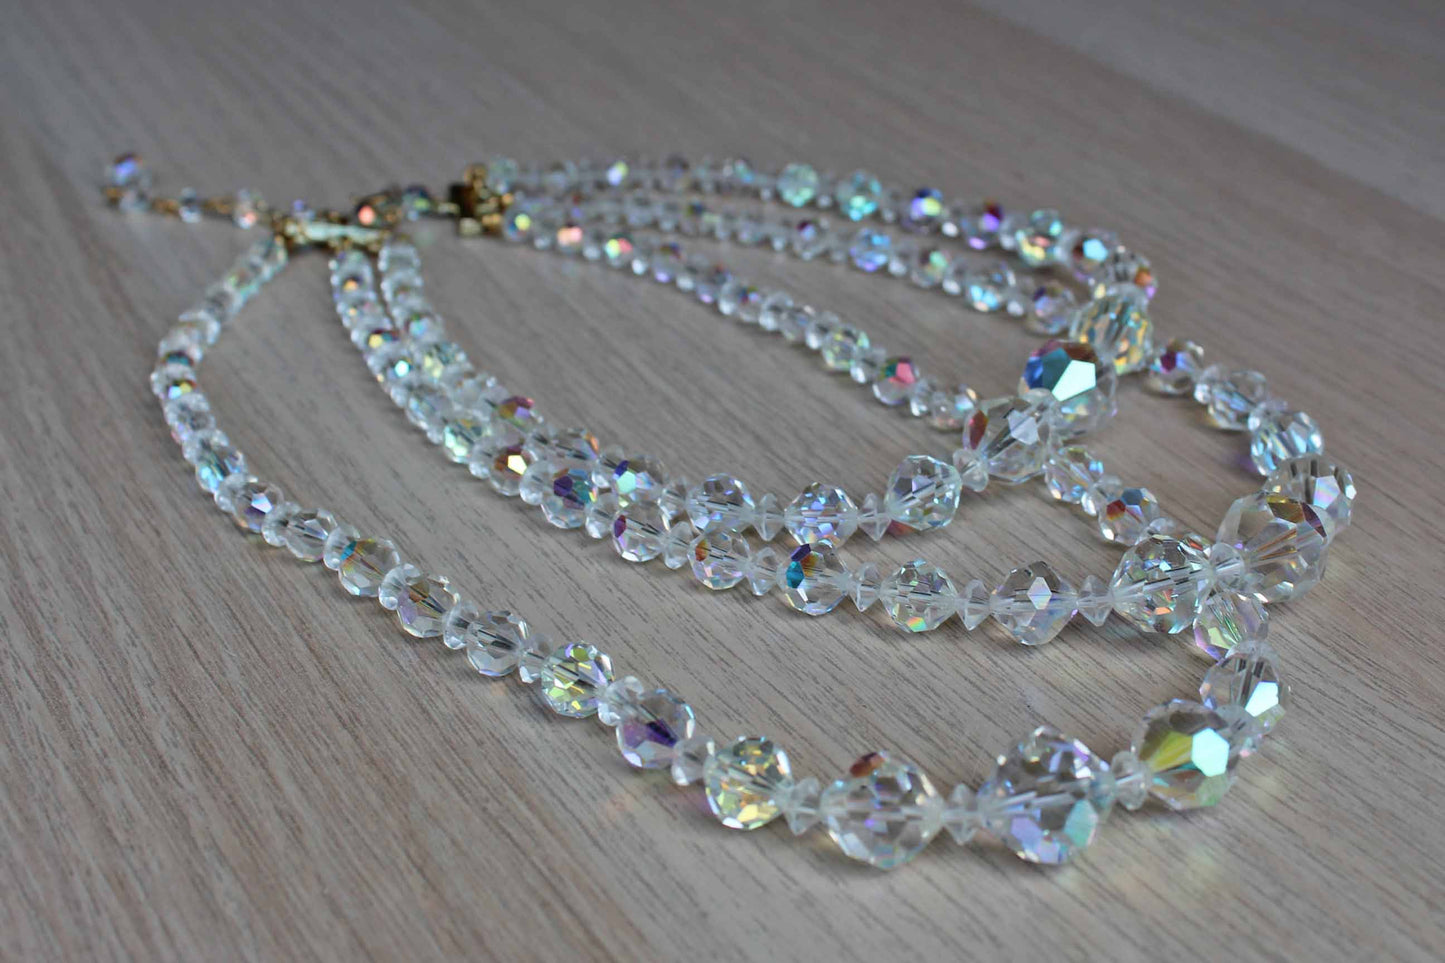 Triple Strand Aurora Borealis Faceted Glass Bead Necklace